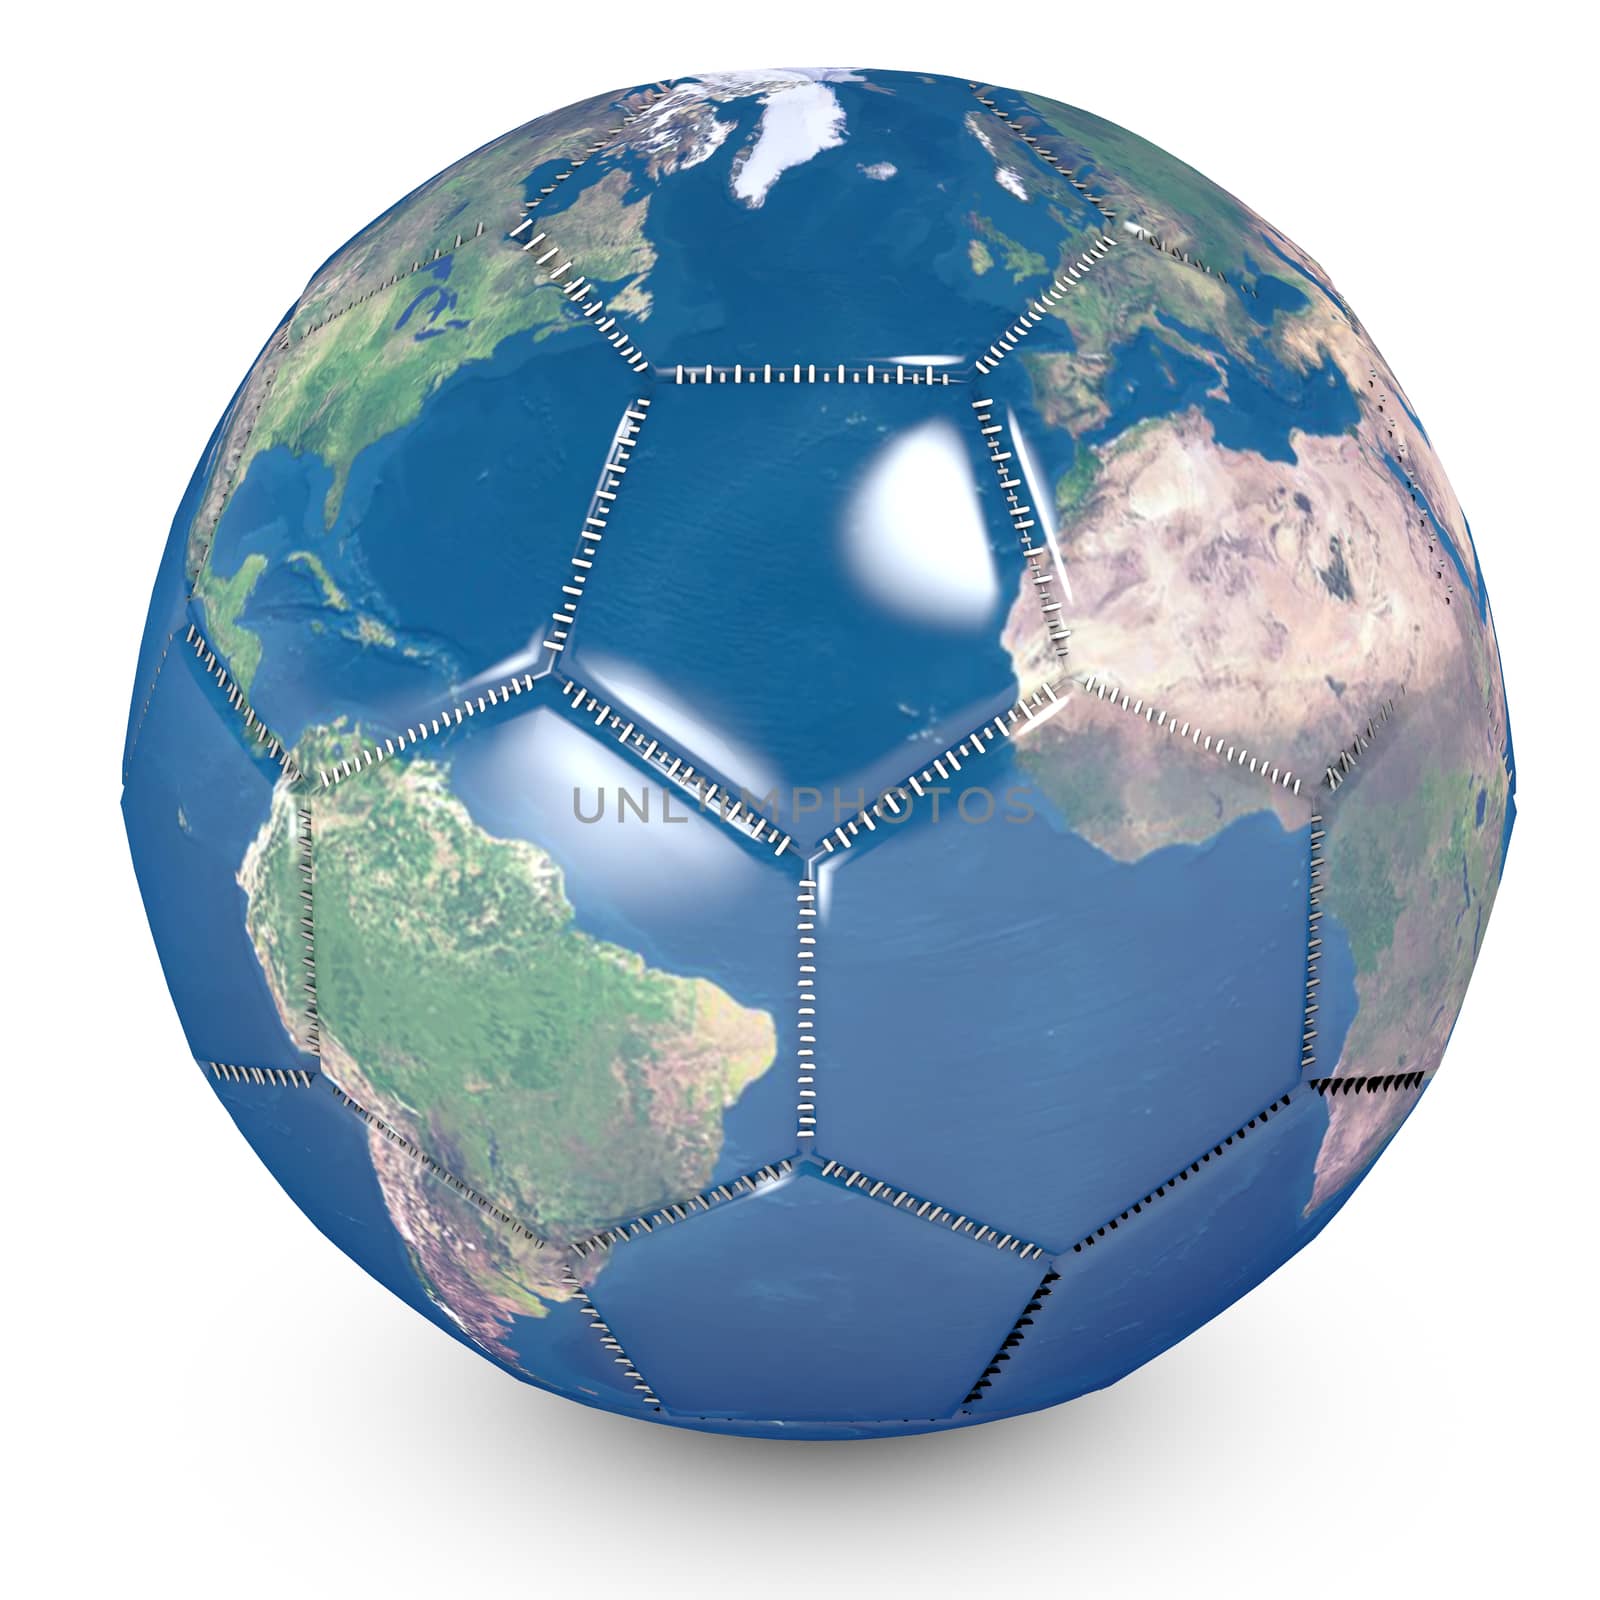 Concept of soccer ball with a printed world by ytjo